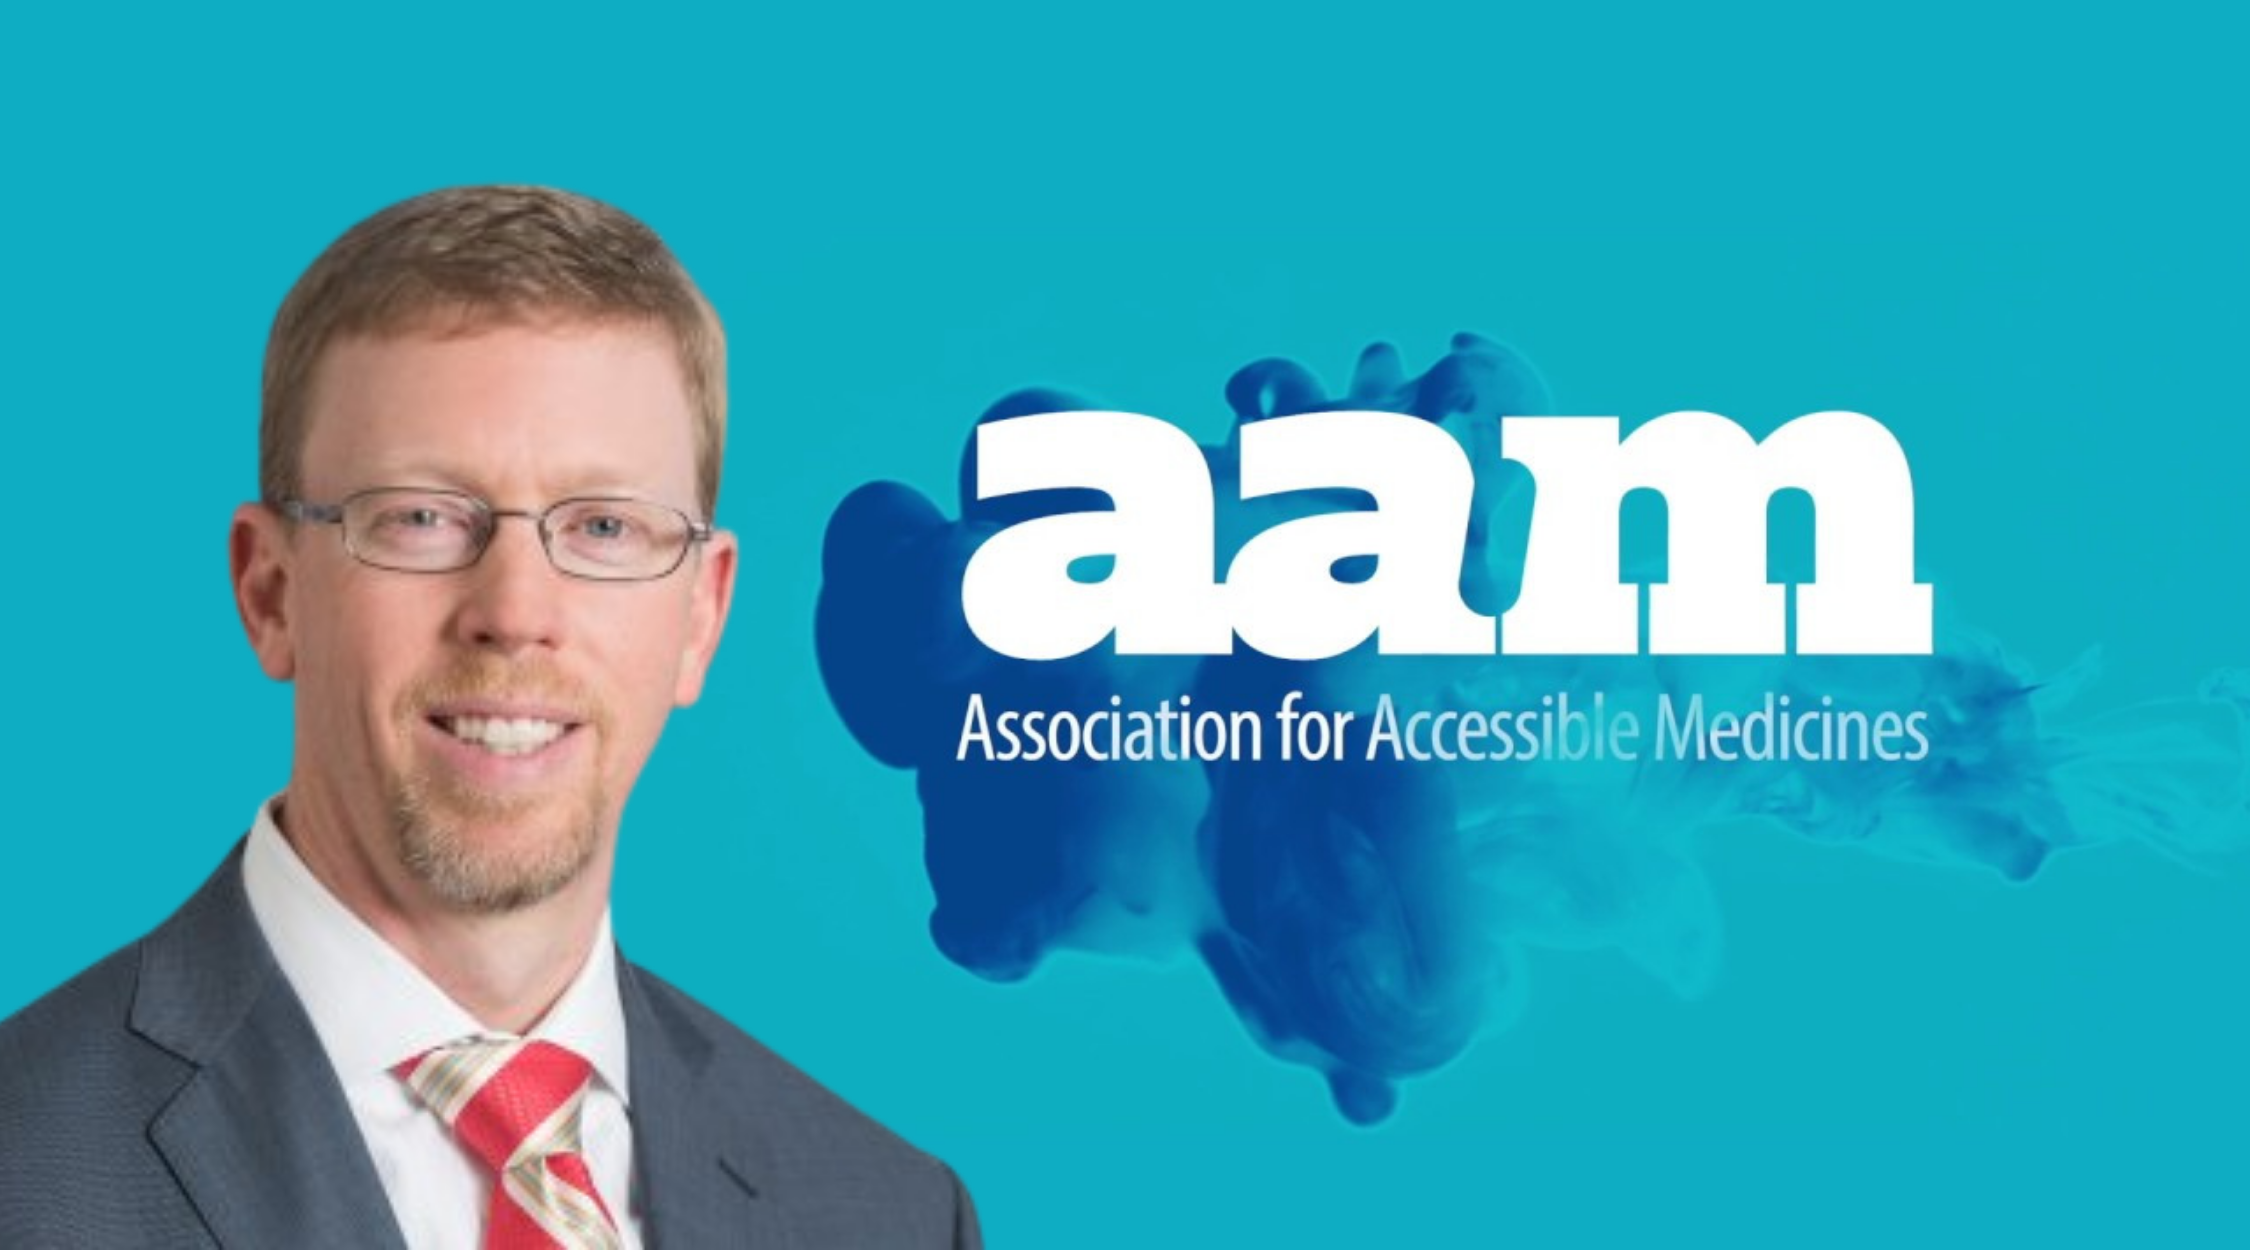 Craig Burton next to the Association for Accessible Medicines logo with navy blue smoke surrounding it